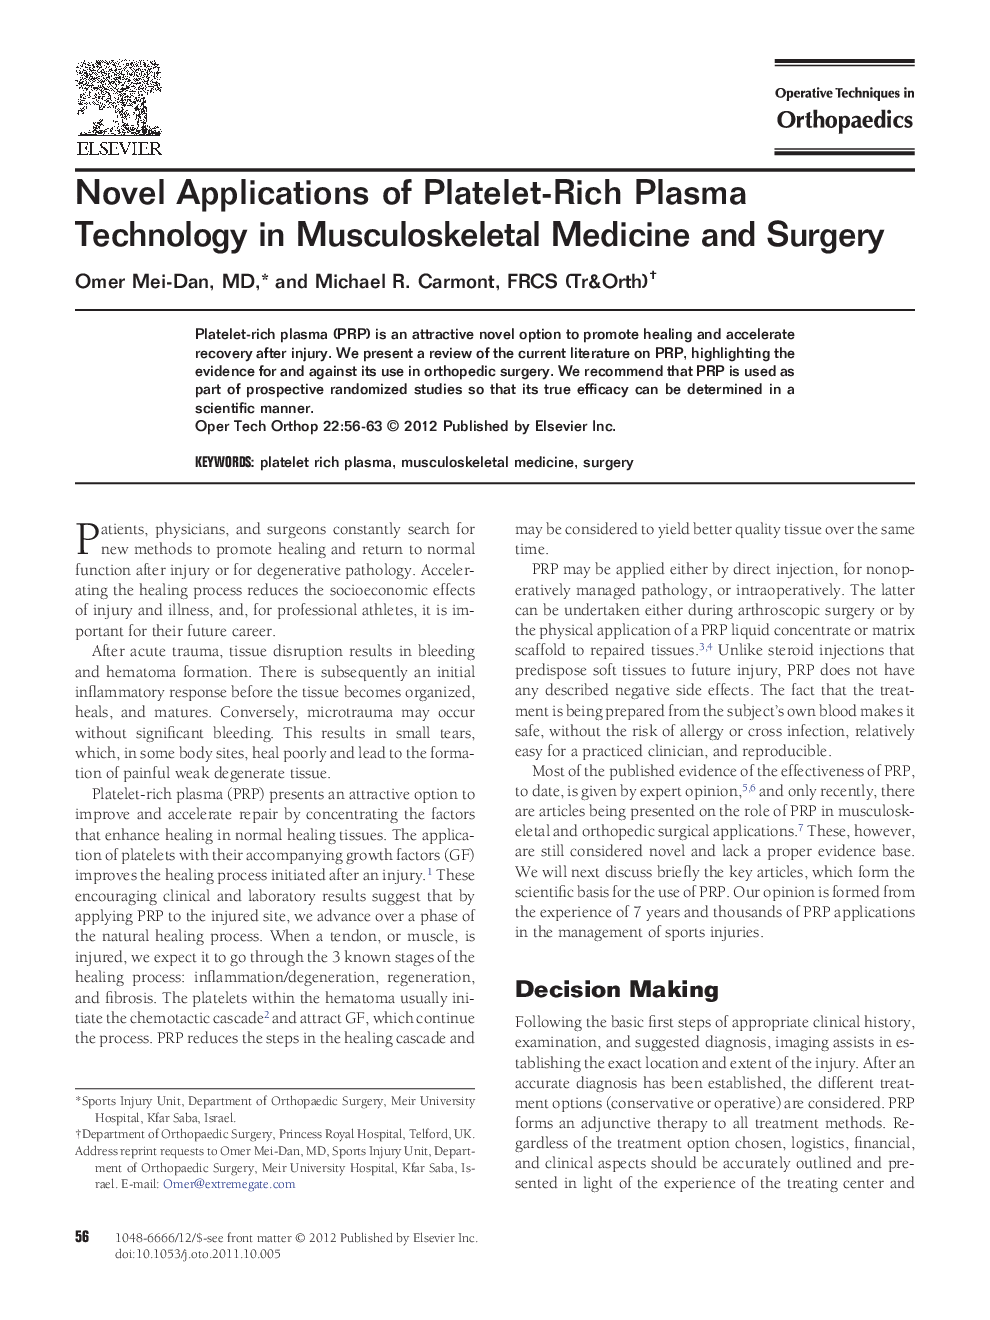 Novel Applications of Platelet-Rich Plasma Technology in Musculoskeletal Medicine and Surgery